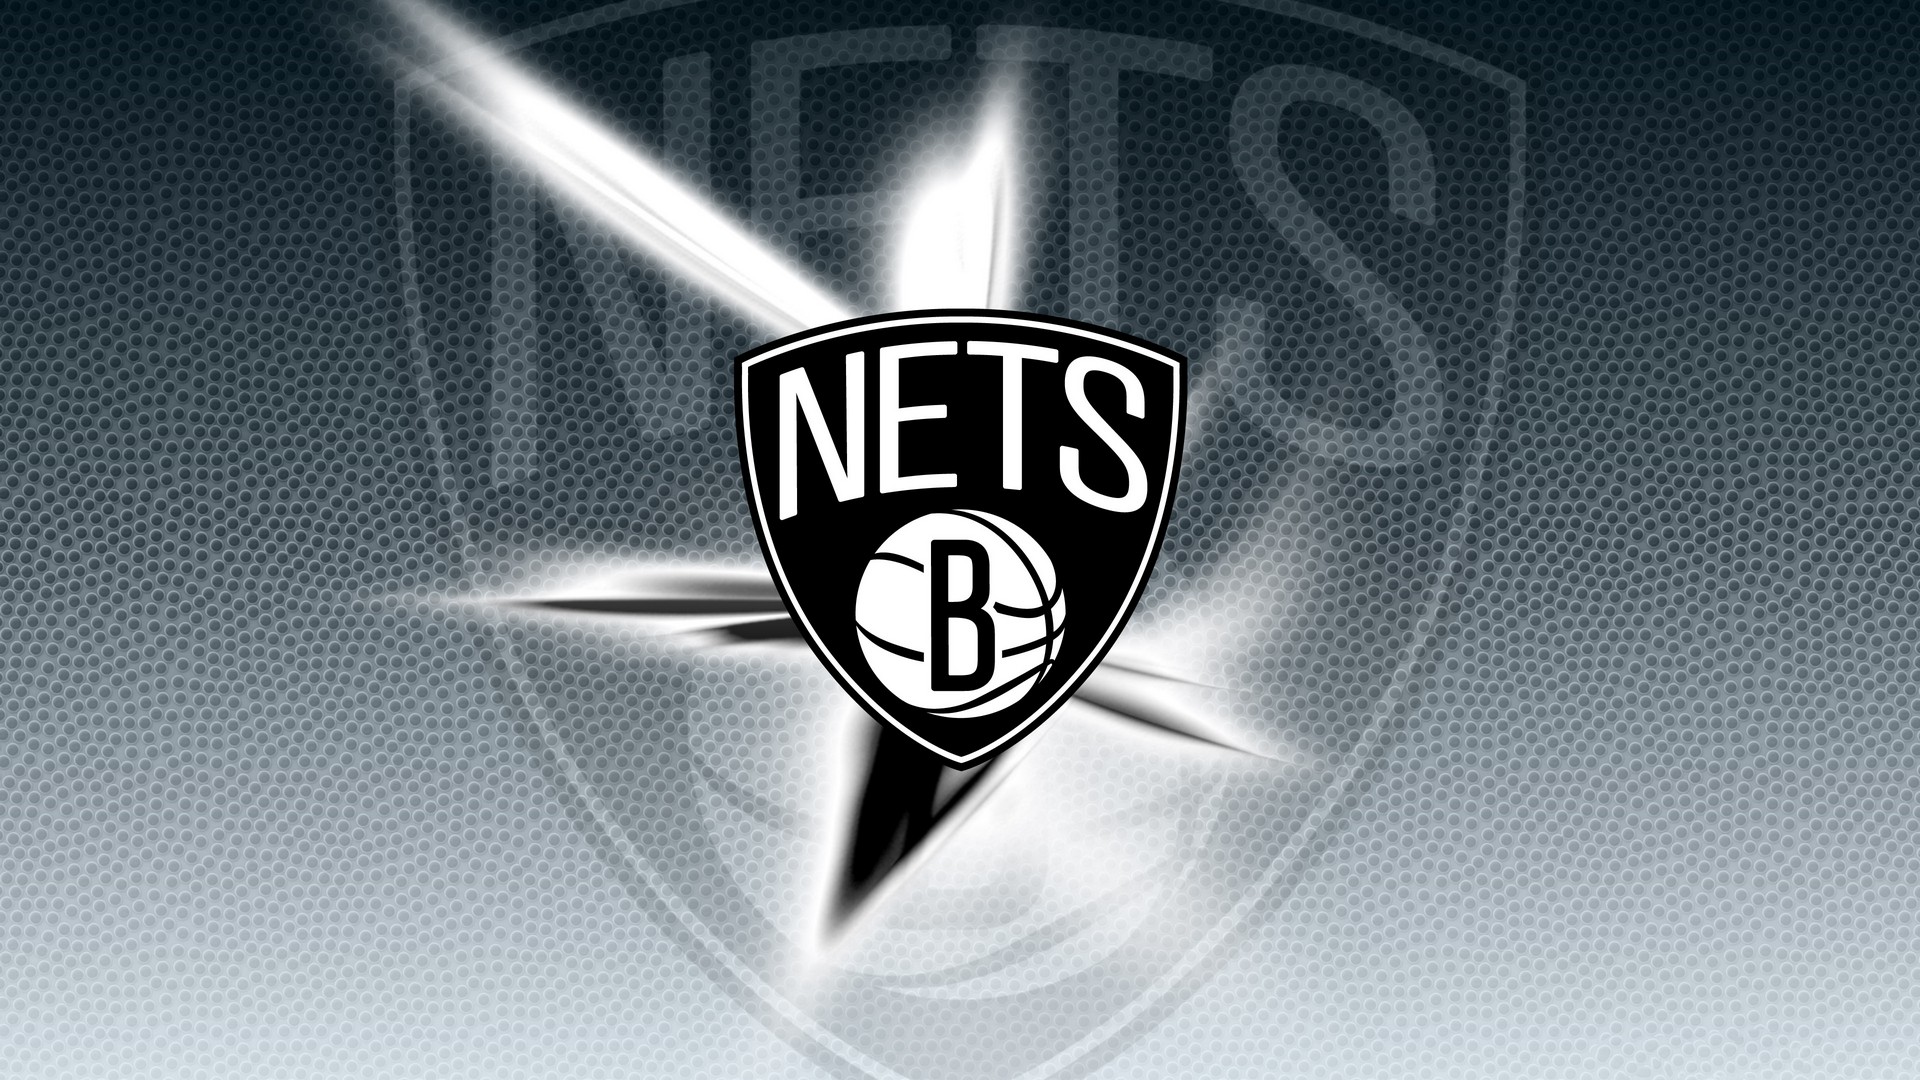 HD Brooklyn Nets Backgrounds with image dimensions 1920x1080 pixel. You can make this wallpaper for your Desktop Computer Backgrounds, Windows or Mac Screensavers, iPhone Lock screen, Tablet or Android and another Mobile Phone device